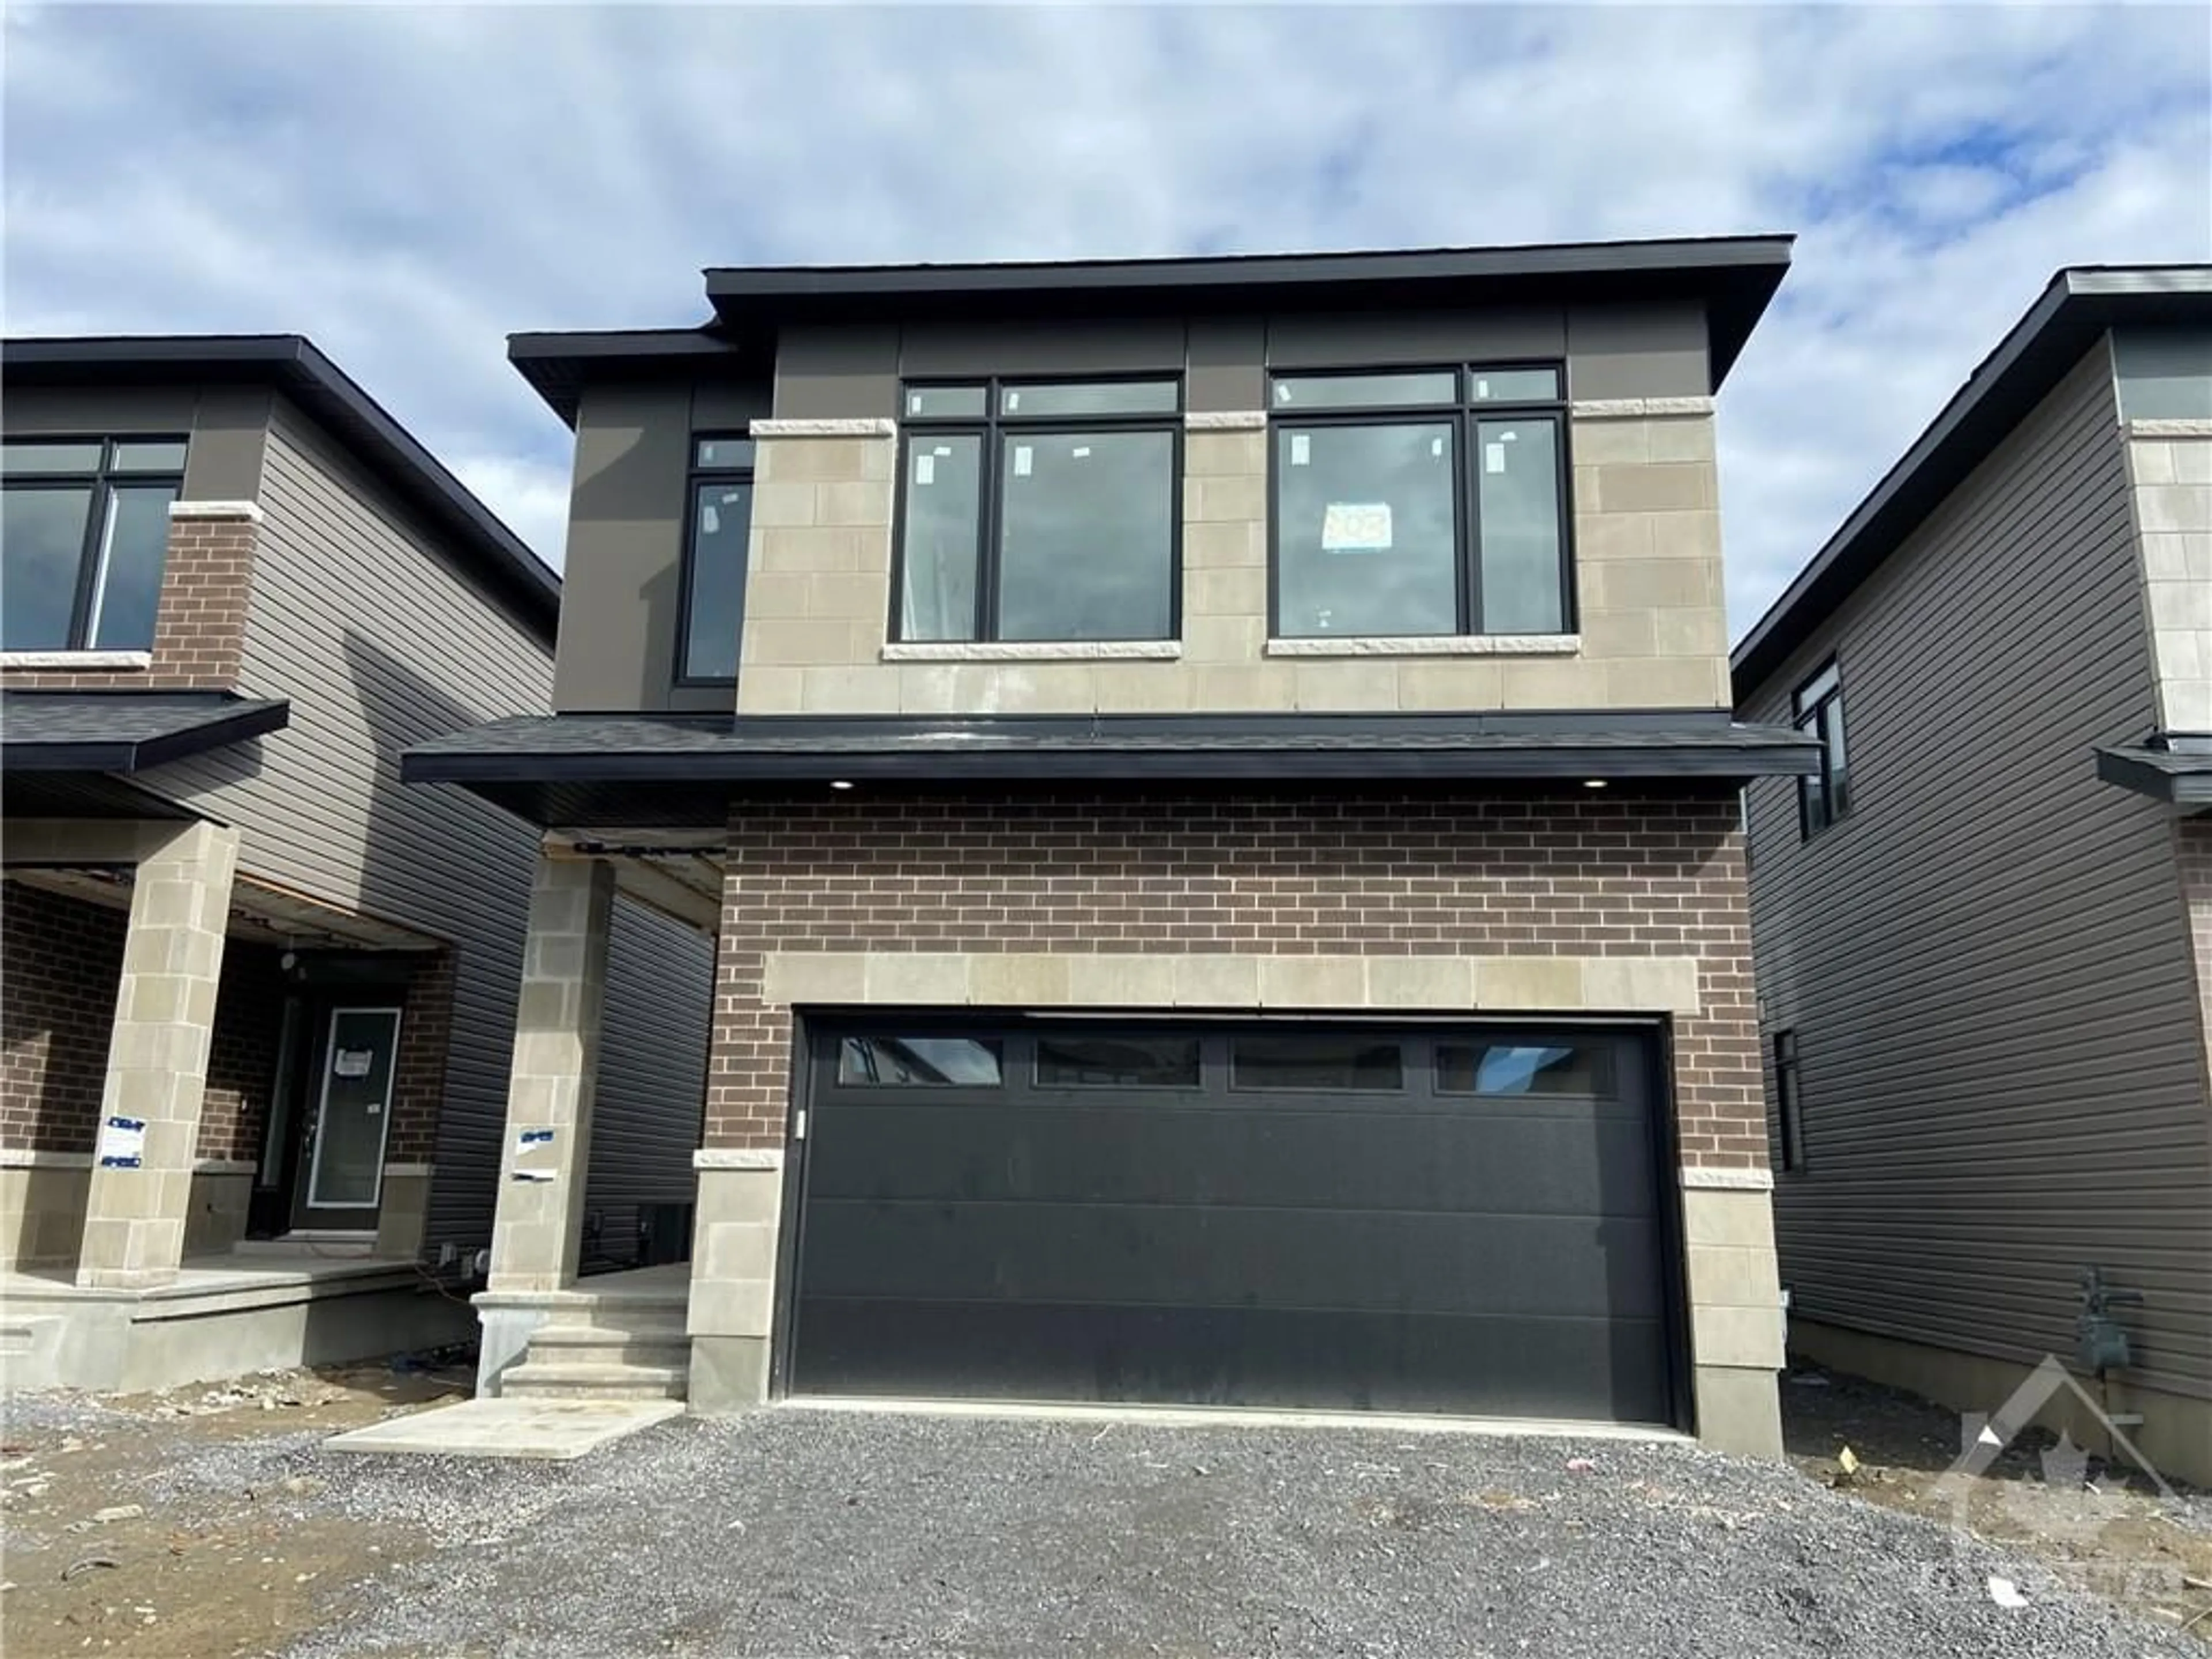 Home with brick exterior material for 893 BECKTON Hts, Ottawa Ontario K2S 2P9